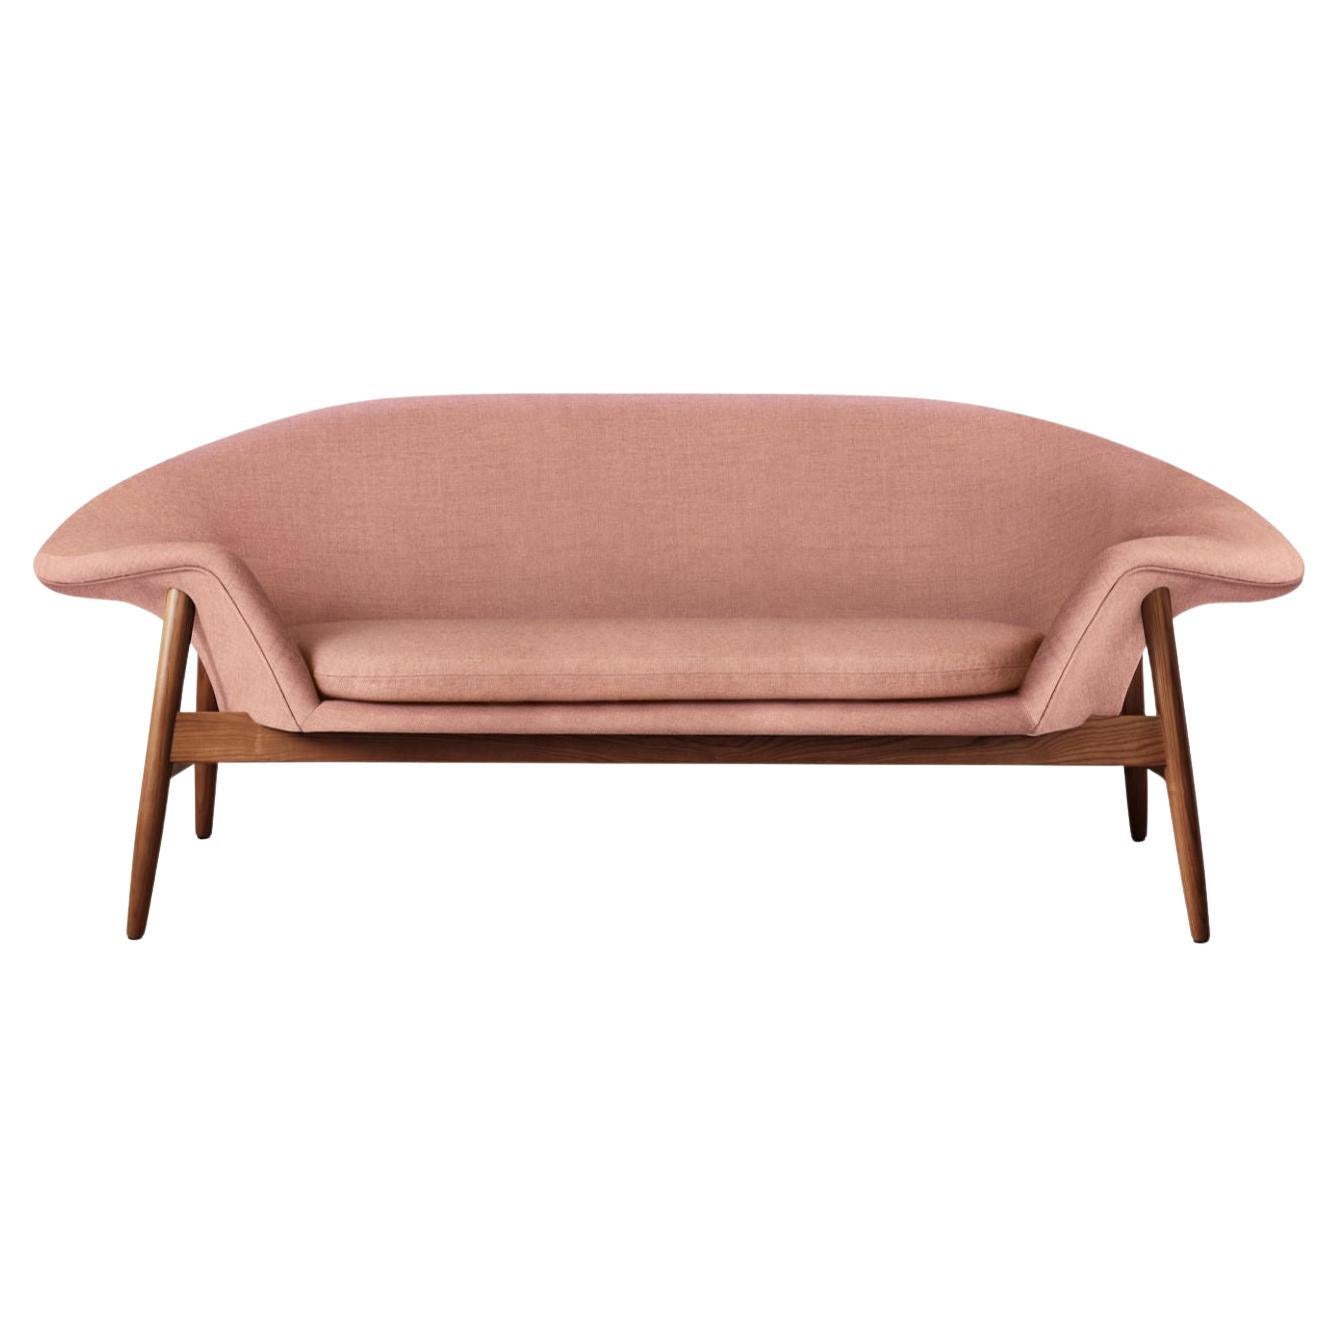 Fried Egg Sofa Pale Rose by Warm Nordic For Sale